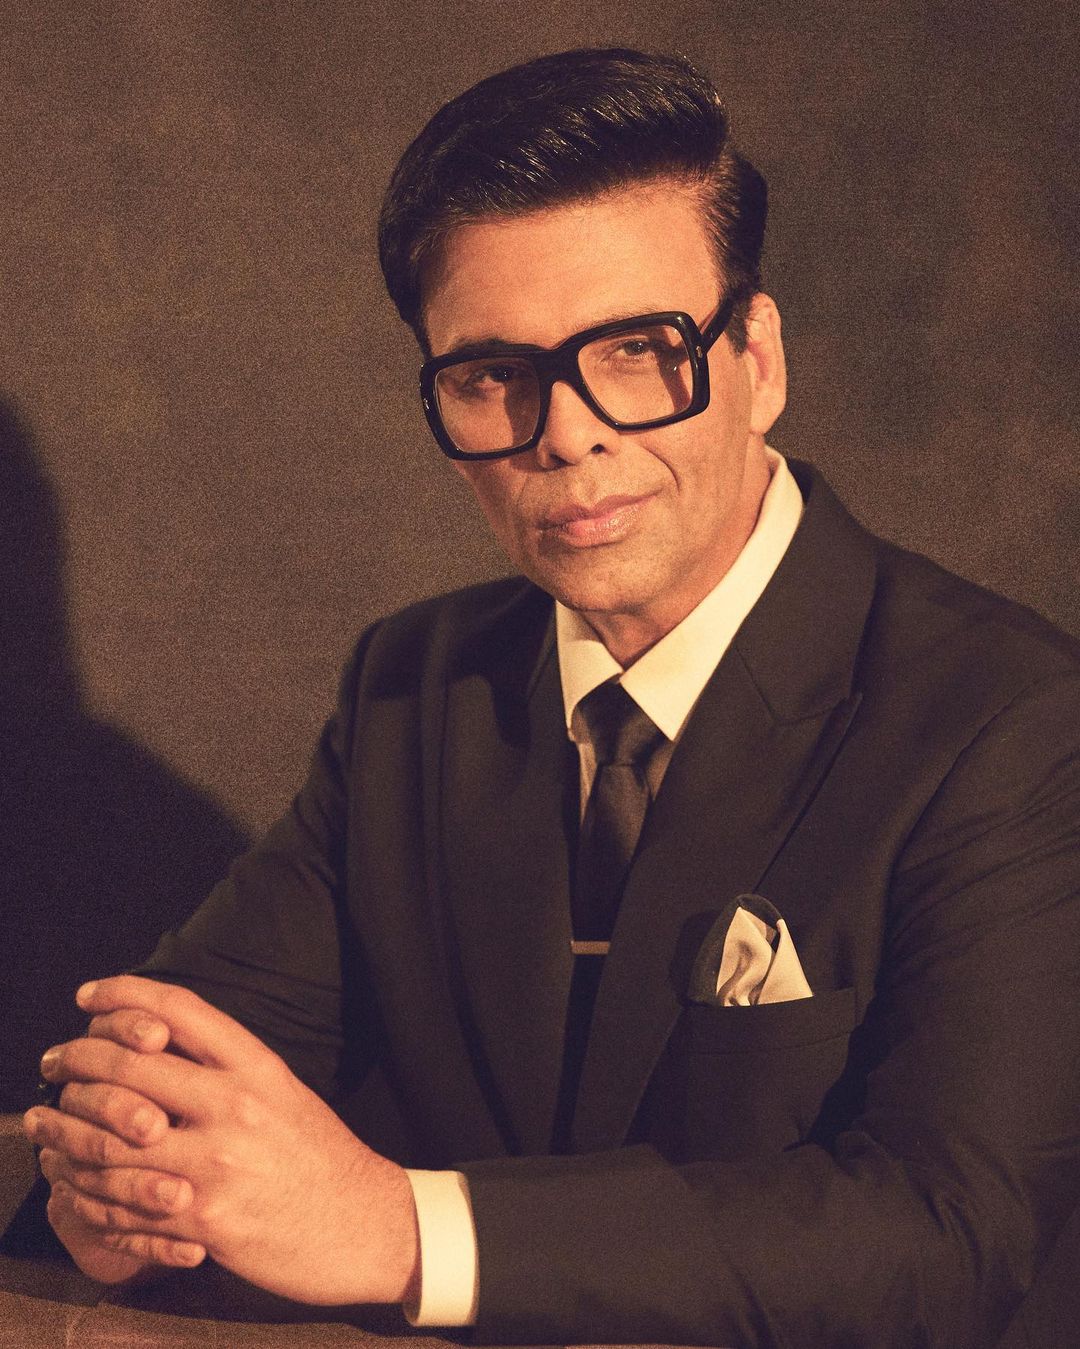 Karan Johar to come up with Showtime, based on nepotism